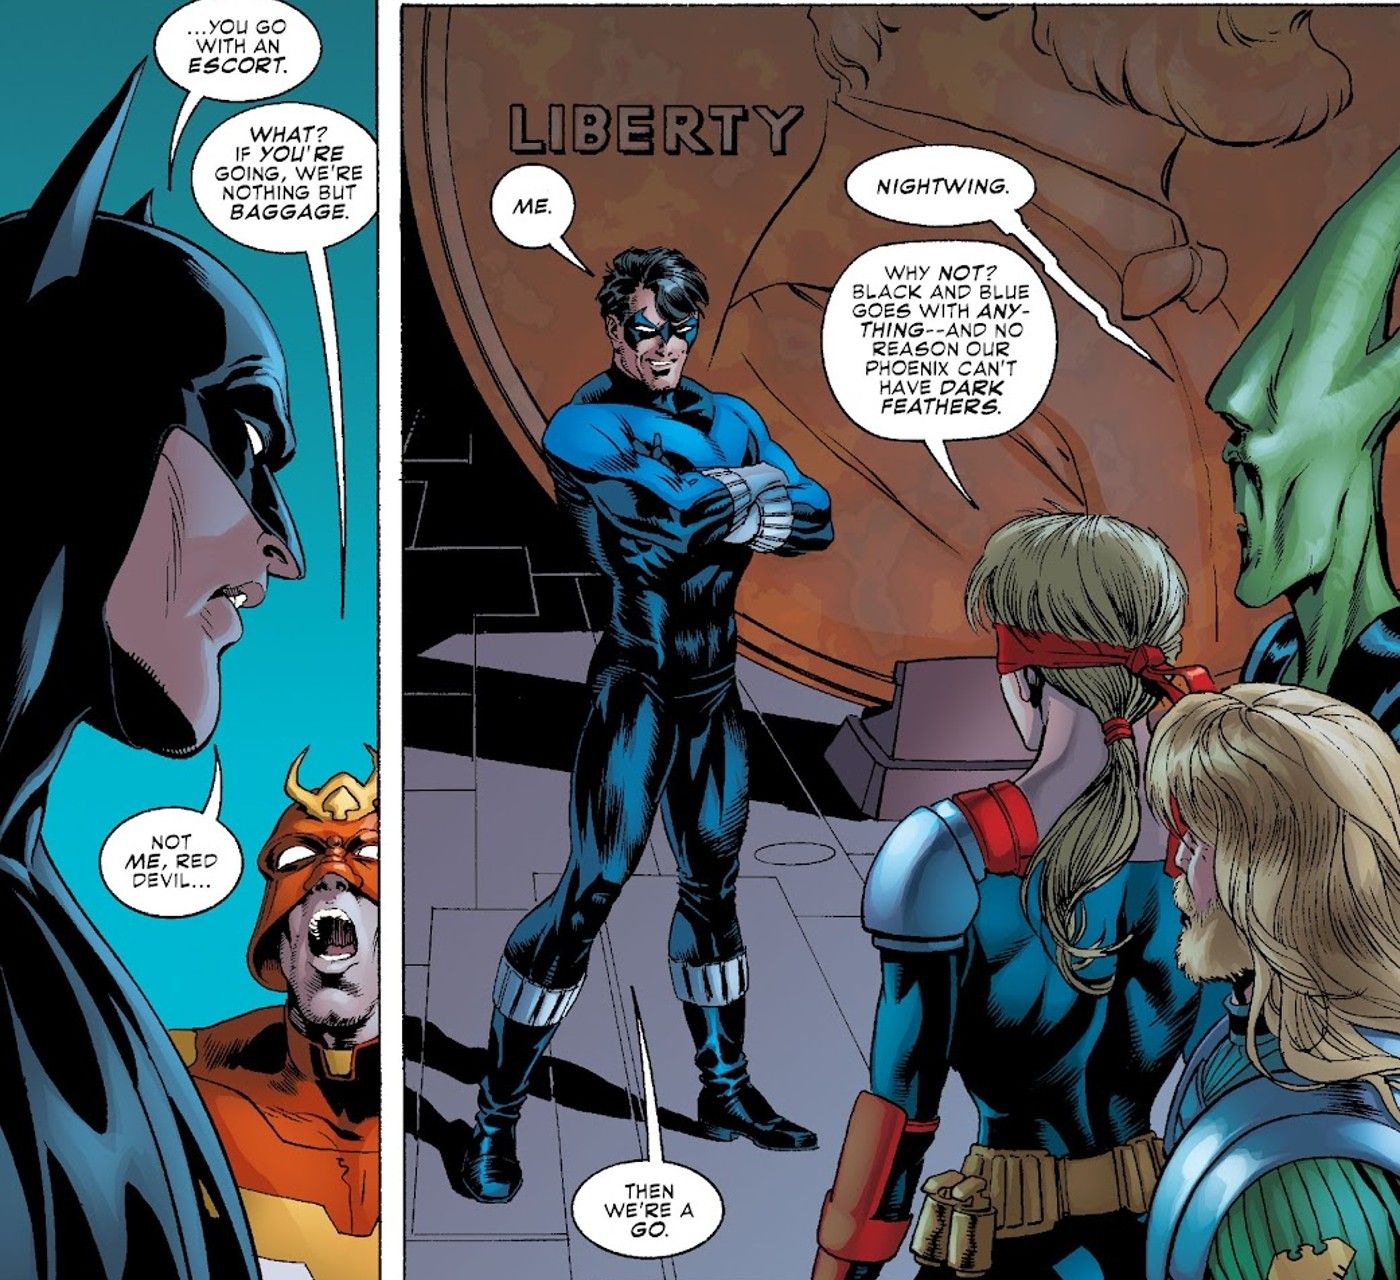 Comic book panels: Batman assigns Nightwing as the leader of the Phoenix Group.